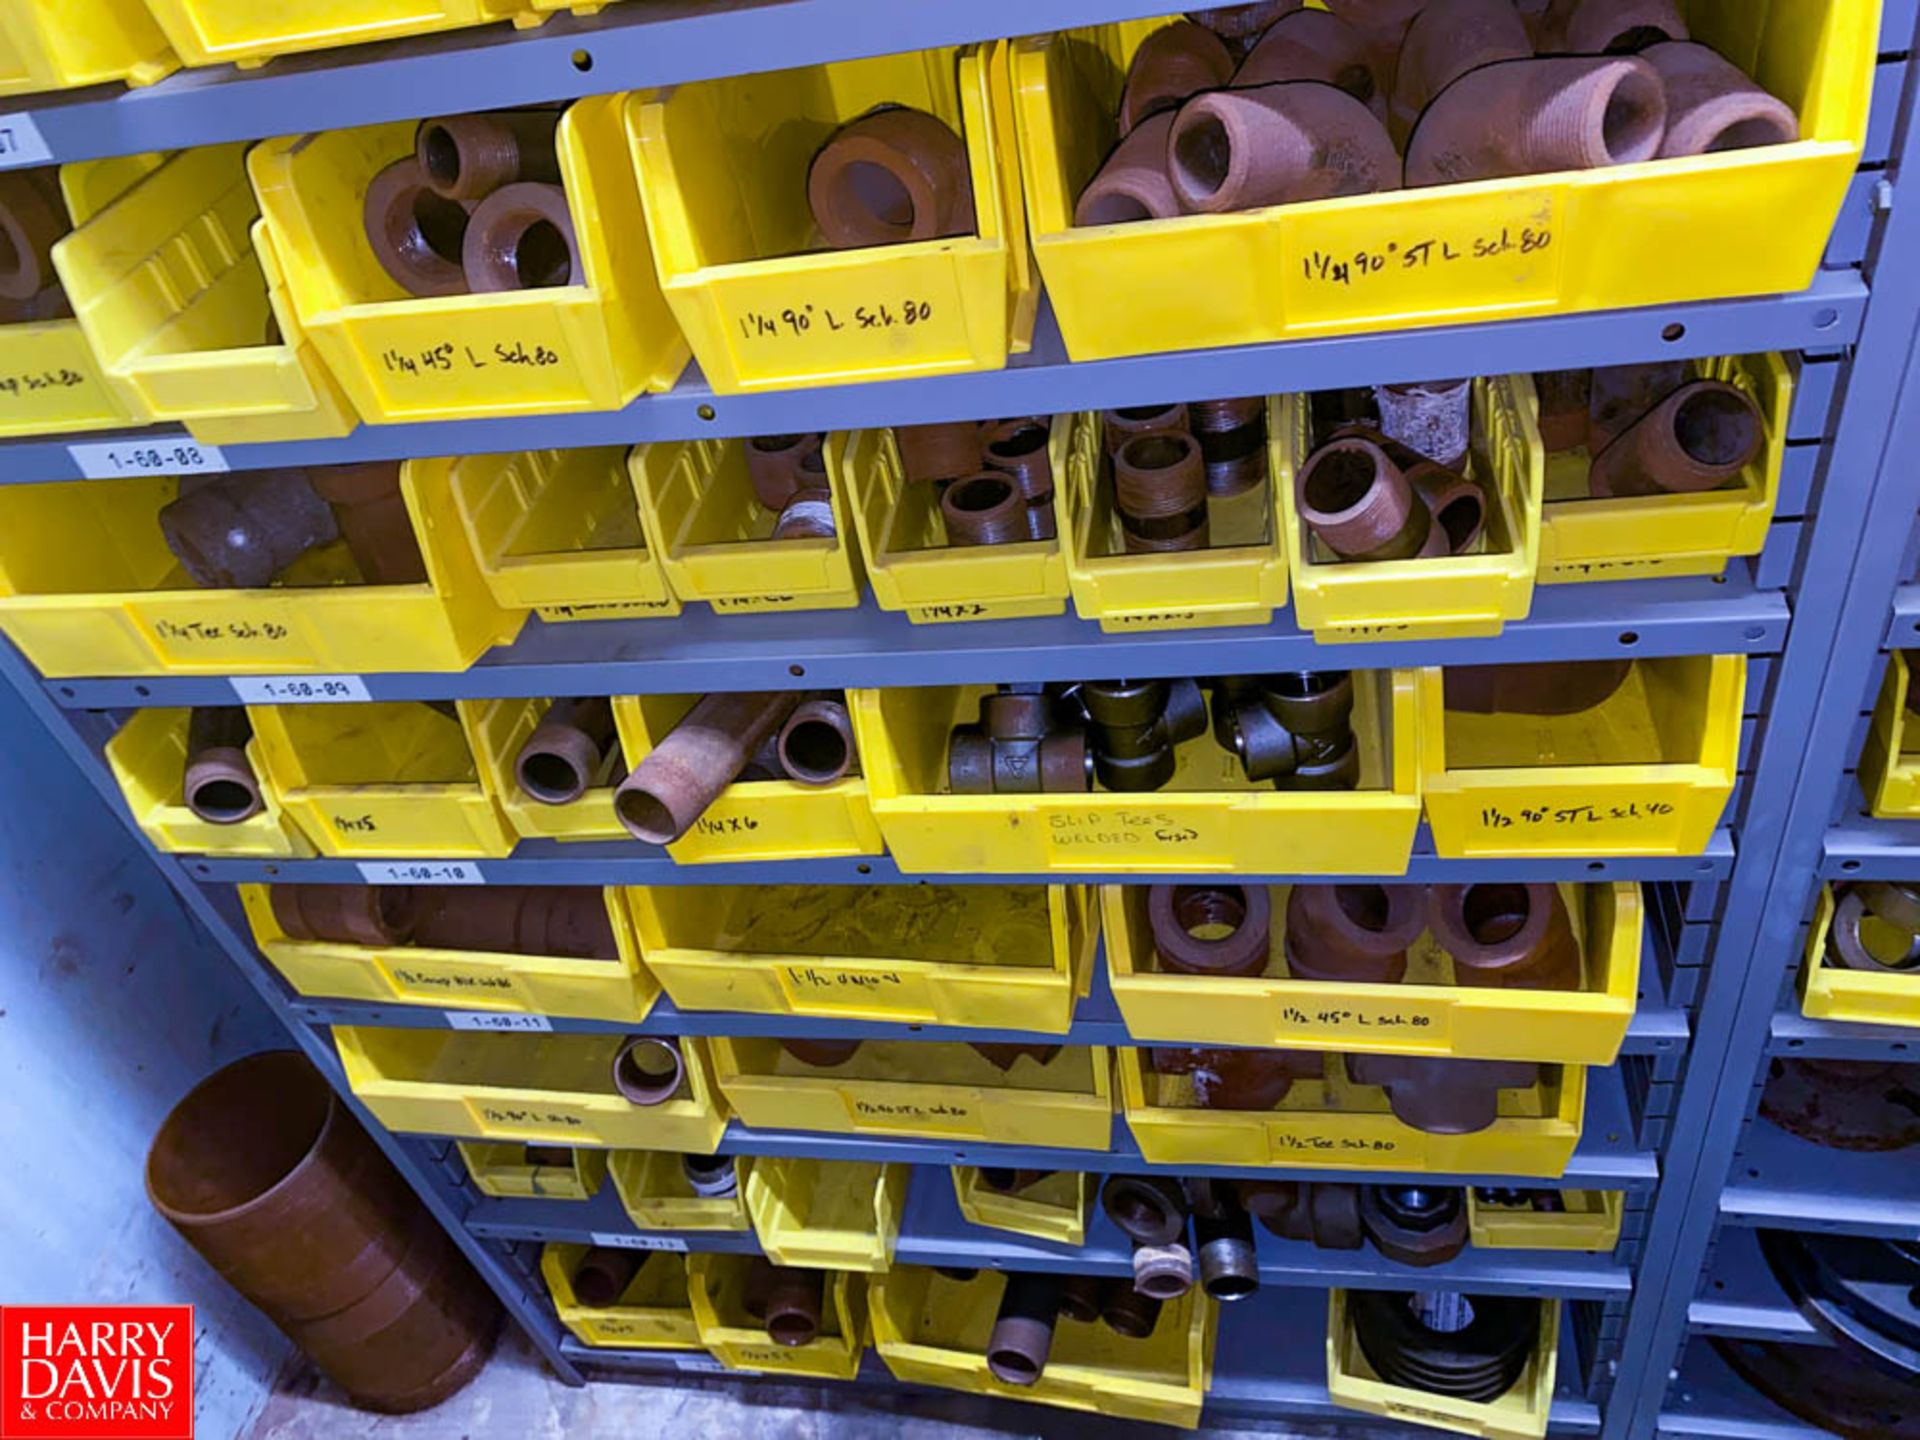 Steel Pipe Fittings Including Elbows, Couplers, Flanges and More - Rigging Fee: $600 - Image 8 of 8